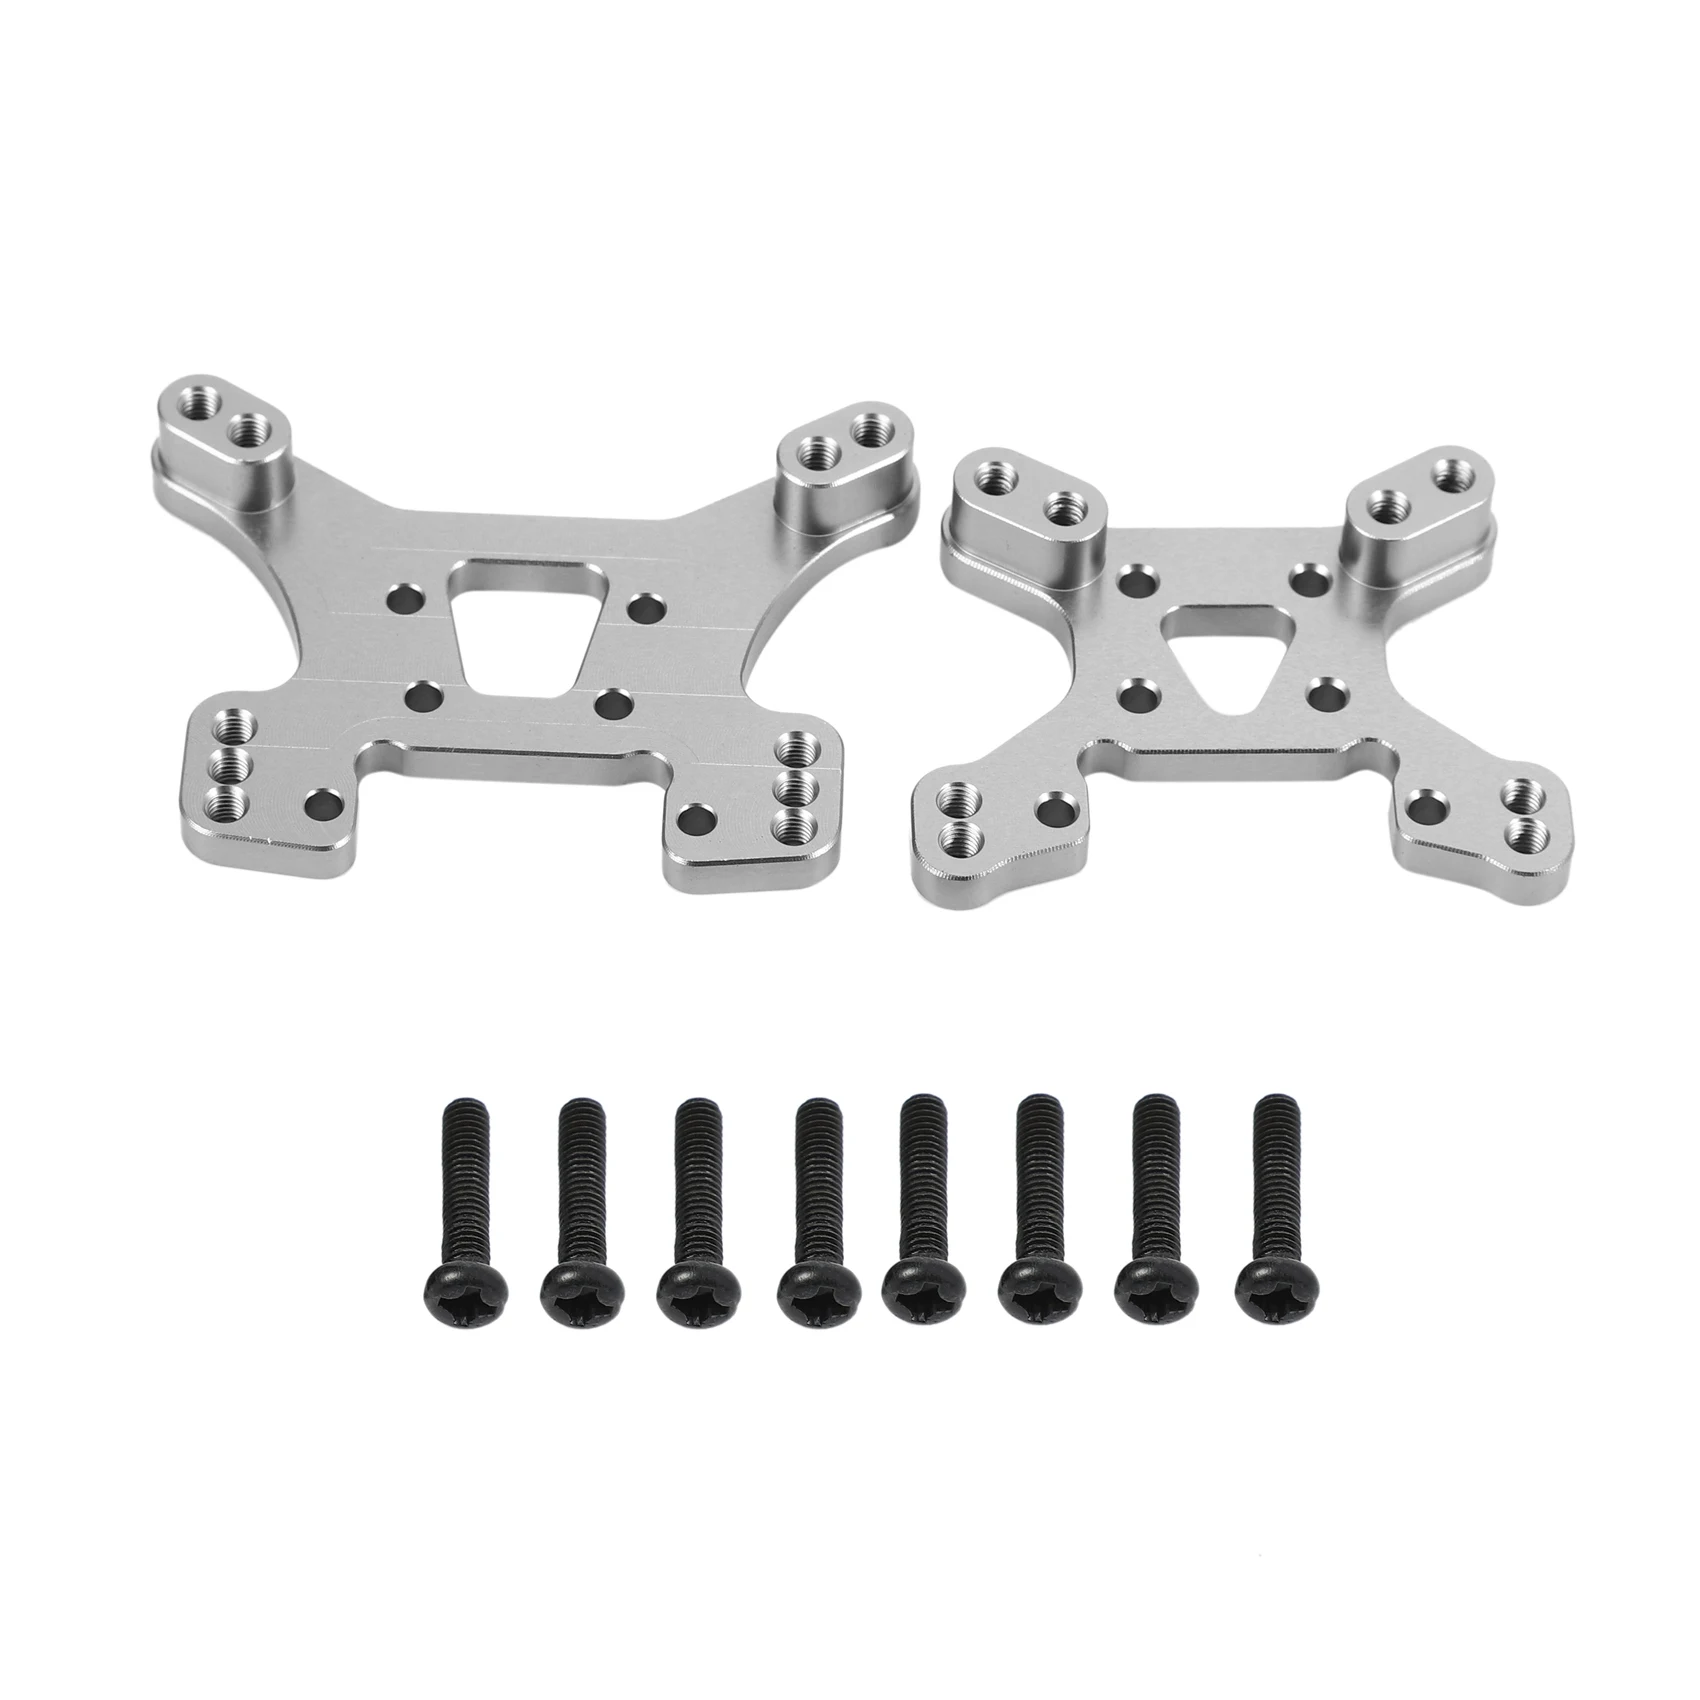 

144001 Part Front and Rear Shock Tower Board Set Replacement Accessories Parts for 144001 1/14 4WD RC Car,Silver